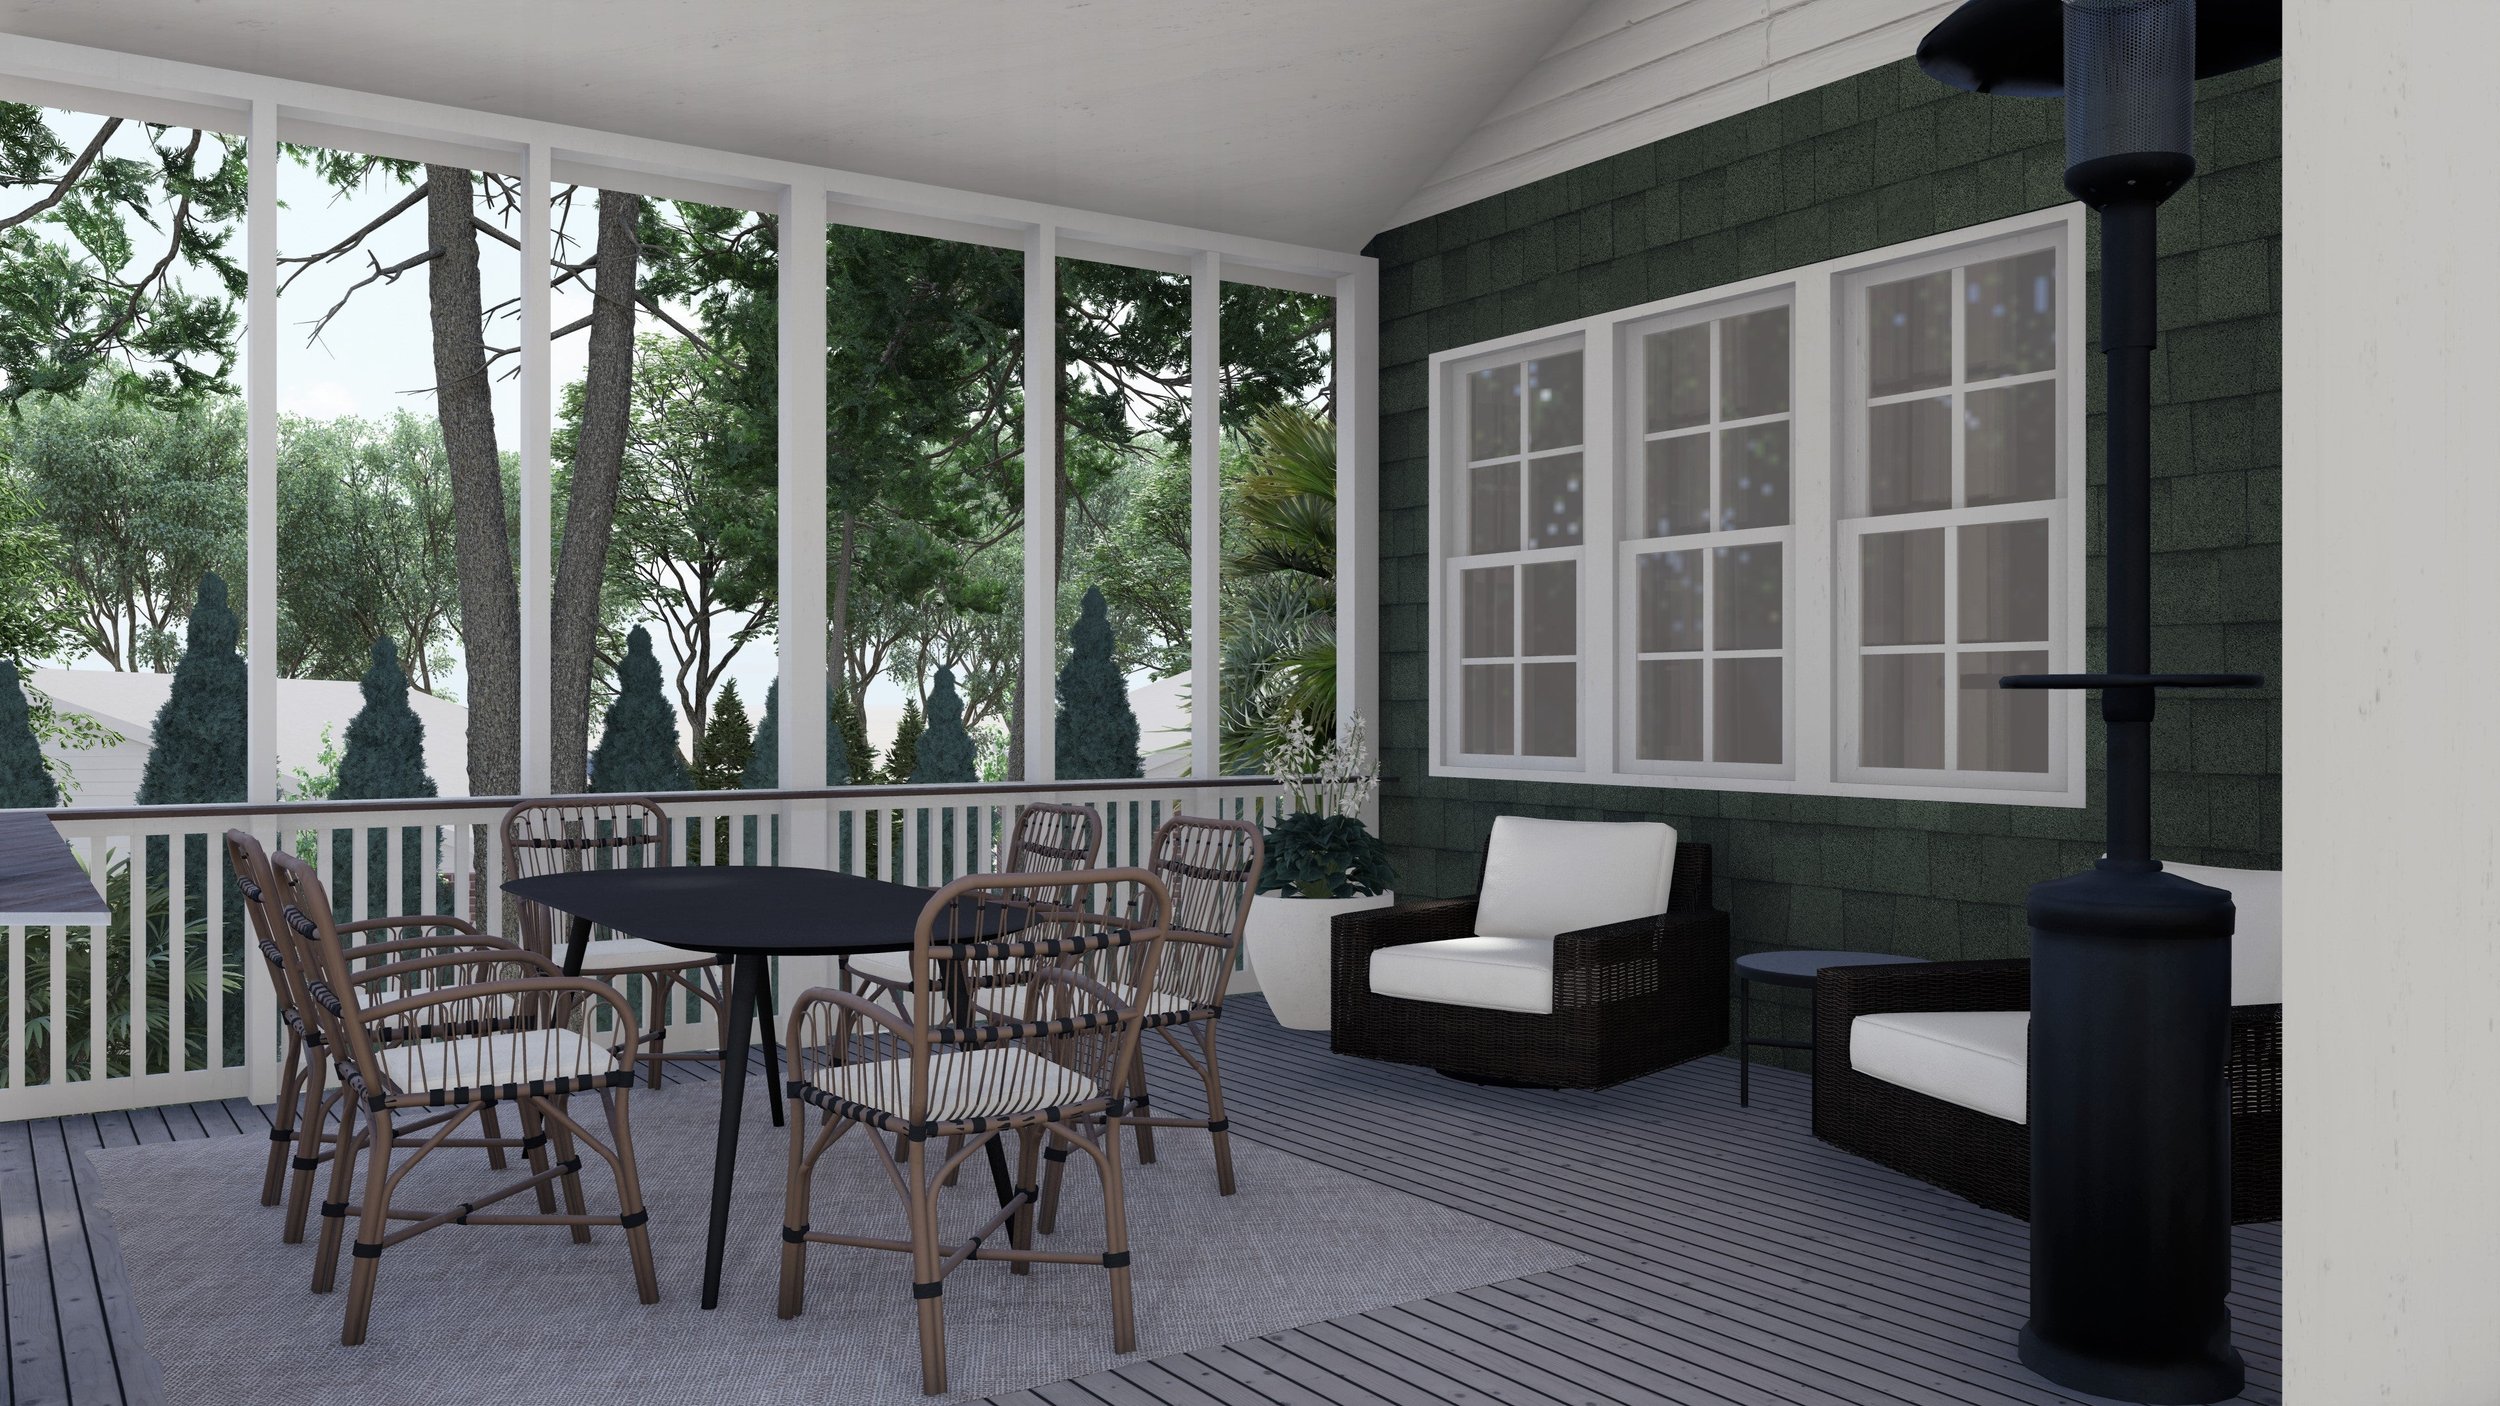 With rattan and wicker patio chairs, the Ballo achieves modern bohemian and traditional style at once on a back porch design for our client in Atlanta, GA.